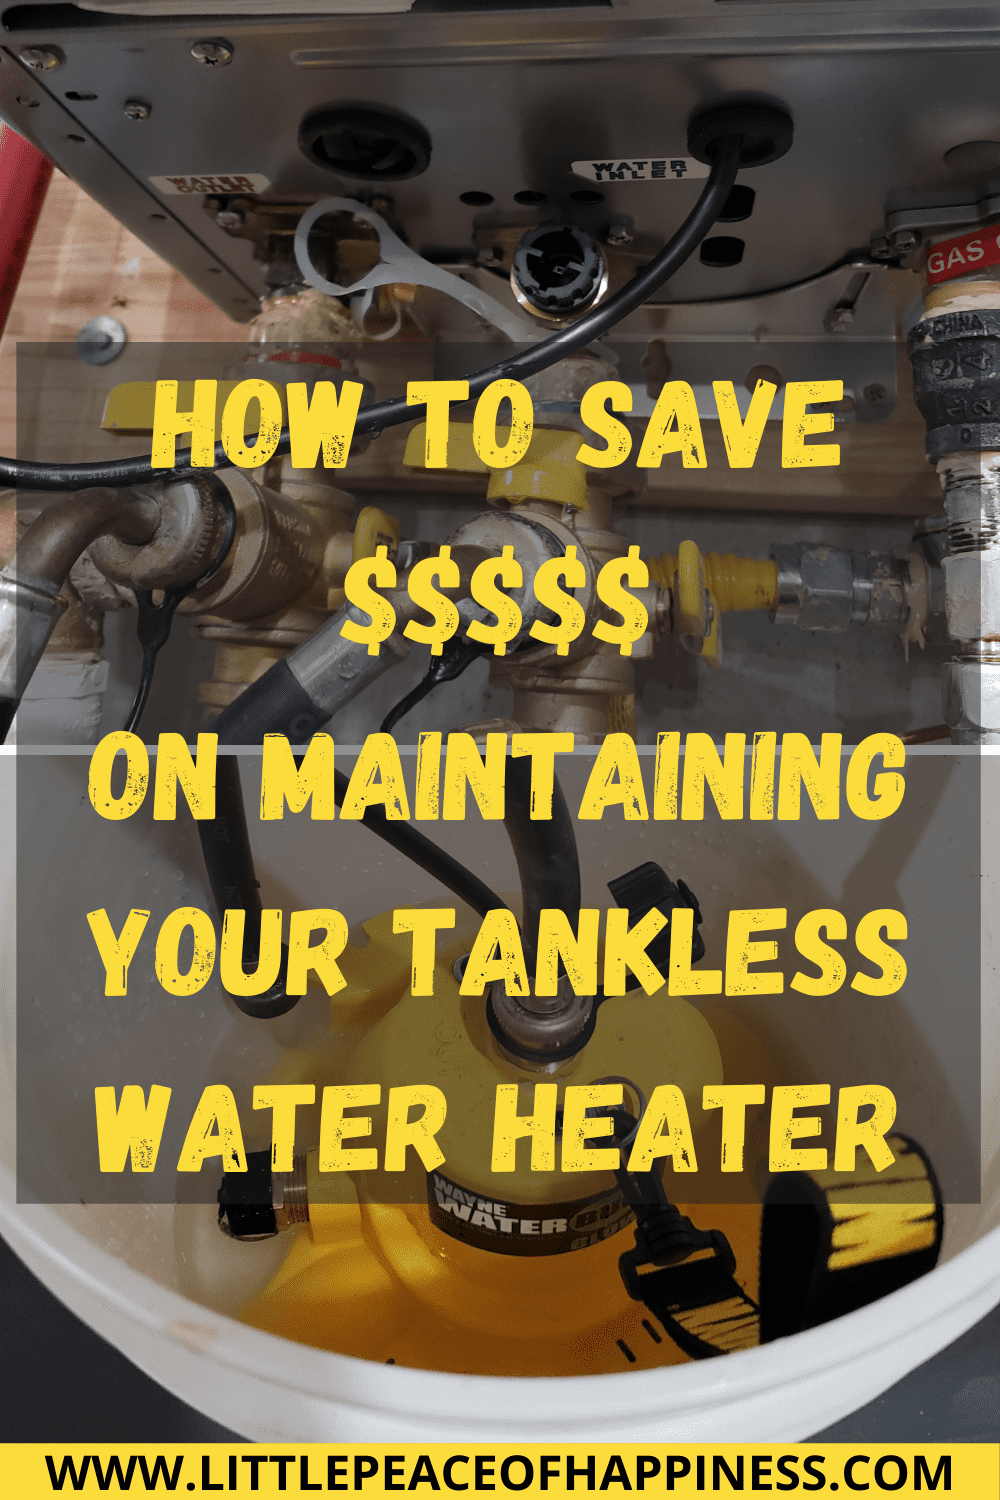 Maintaining a Tankless Water Heater